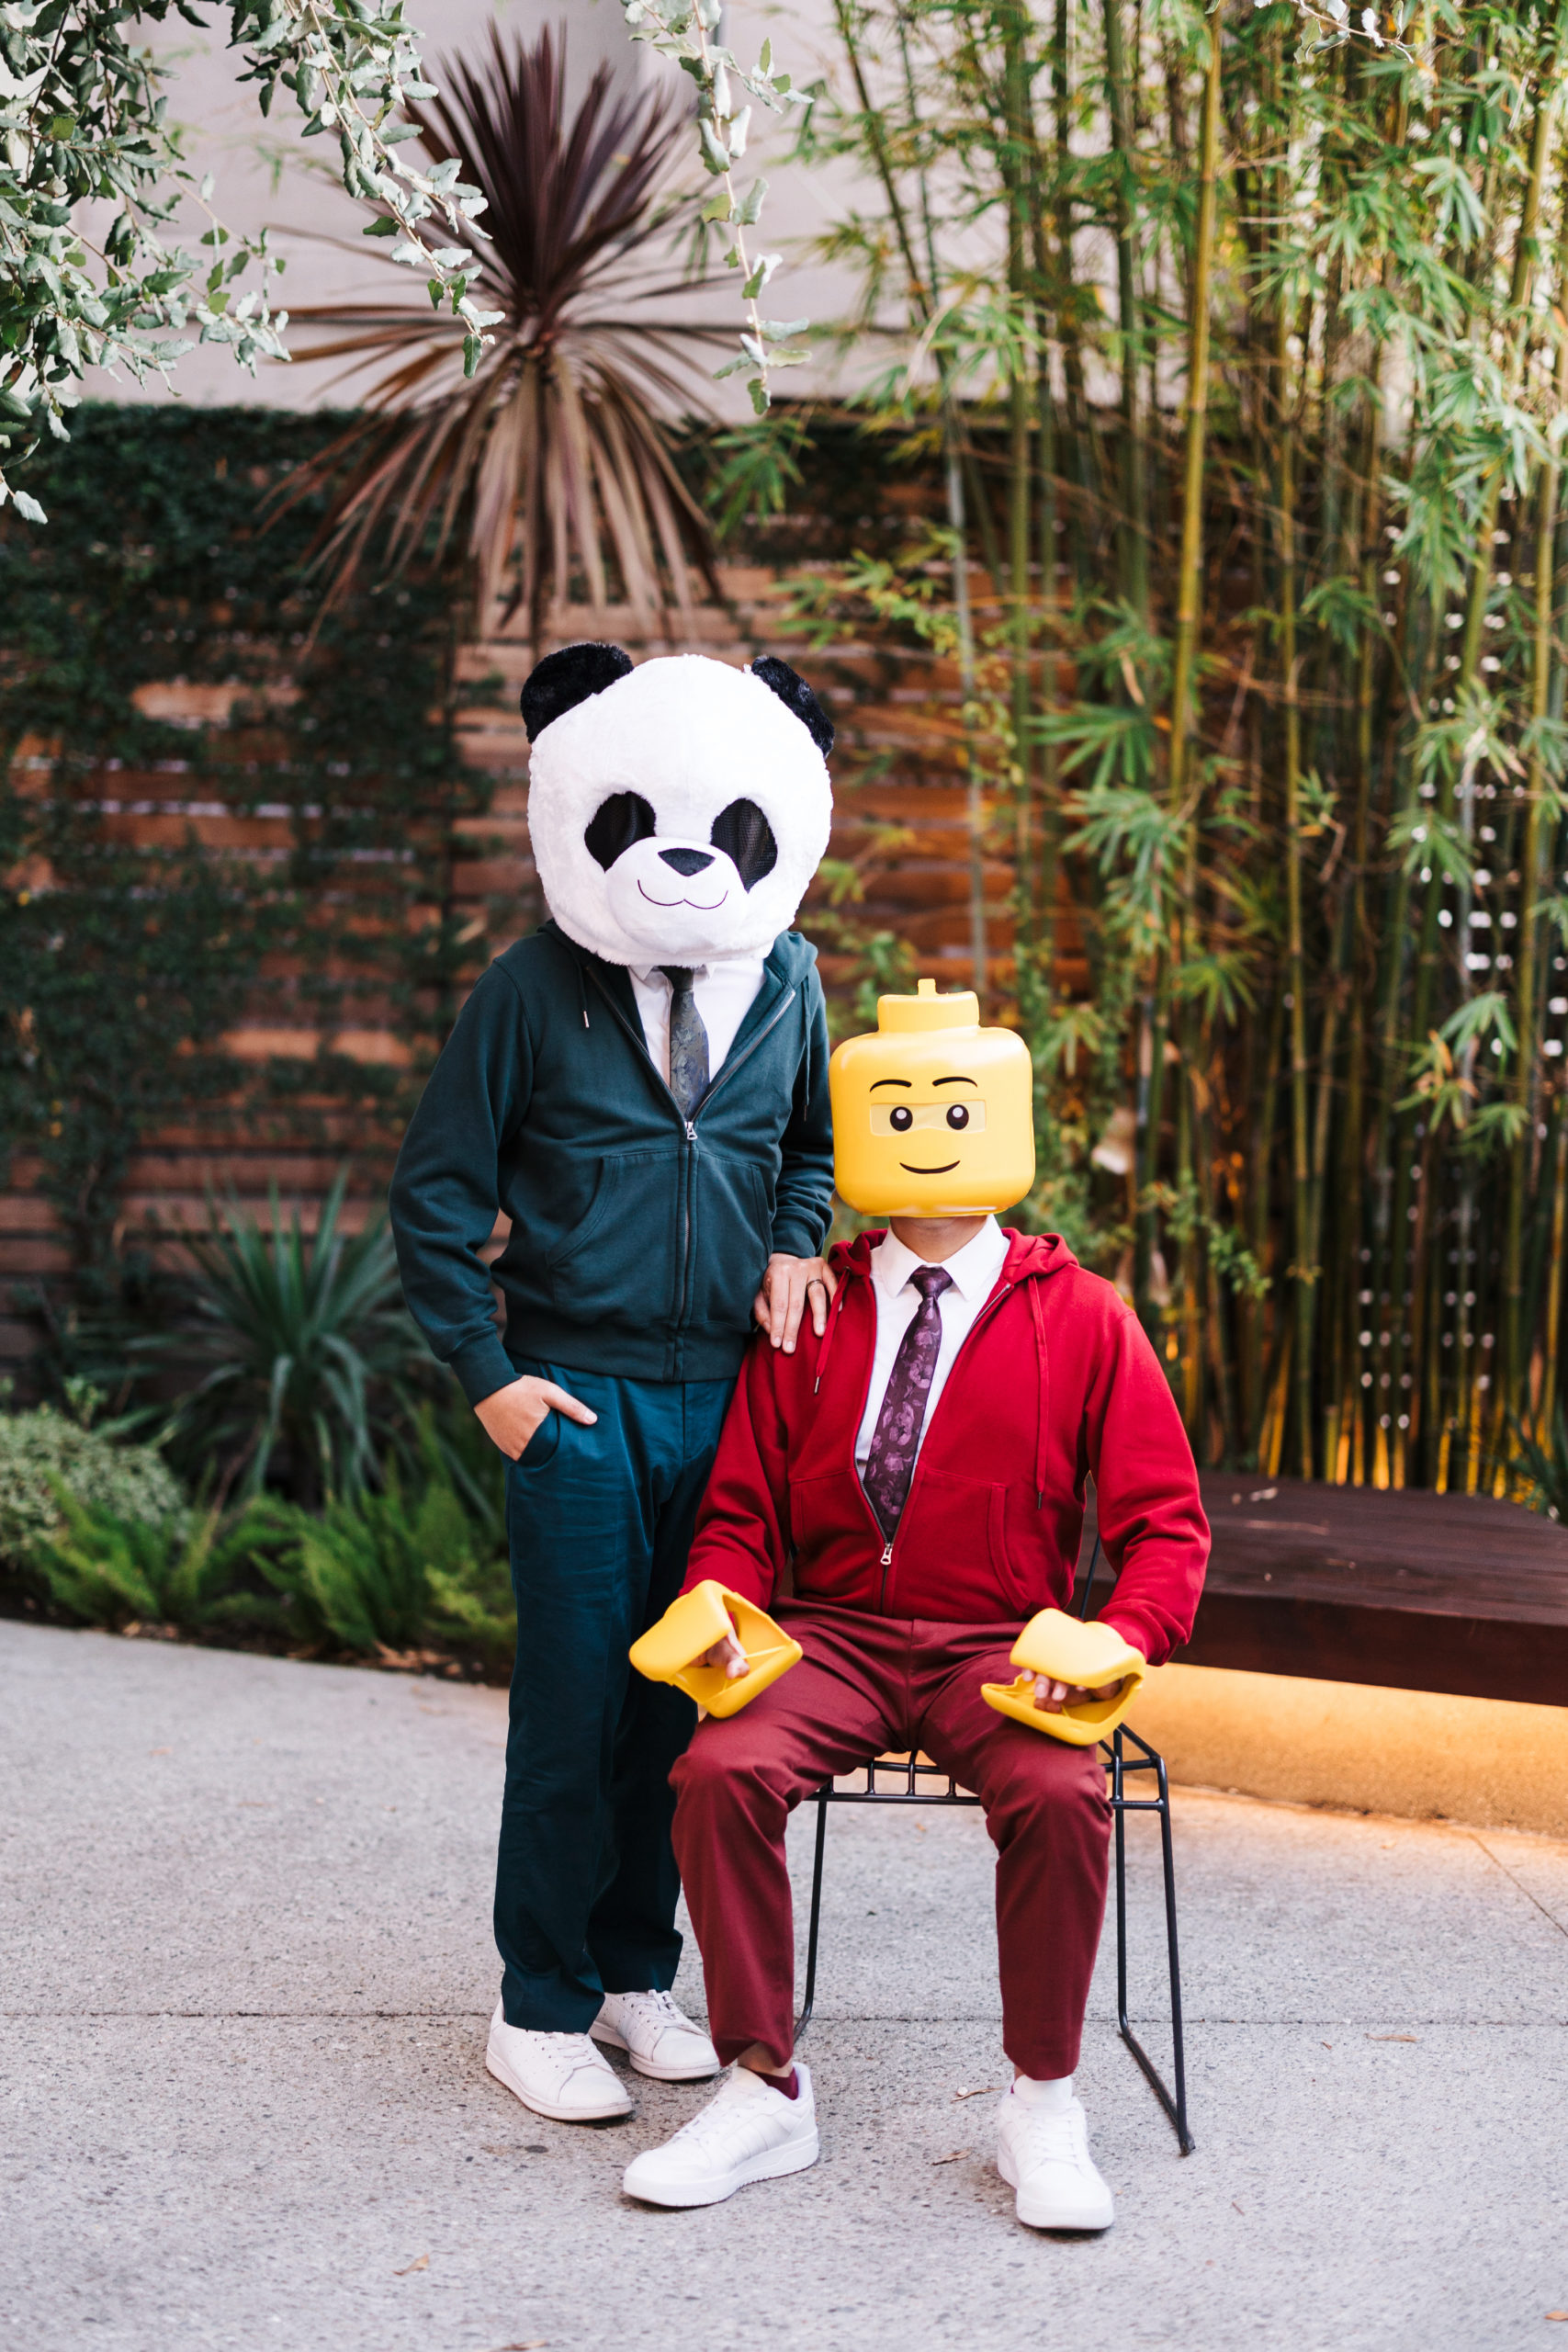 two men standing and sitting dresses as a panda and a lego character